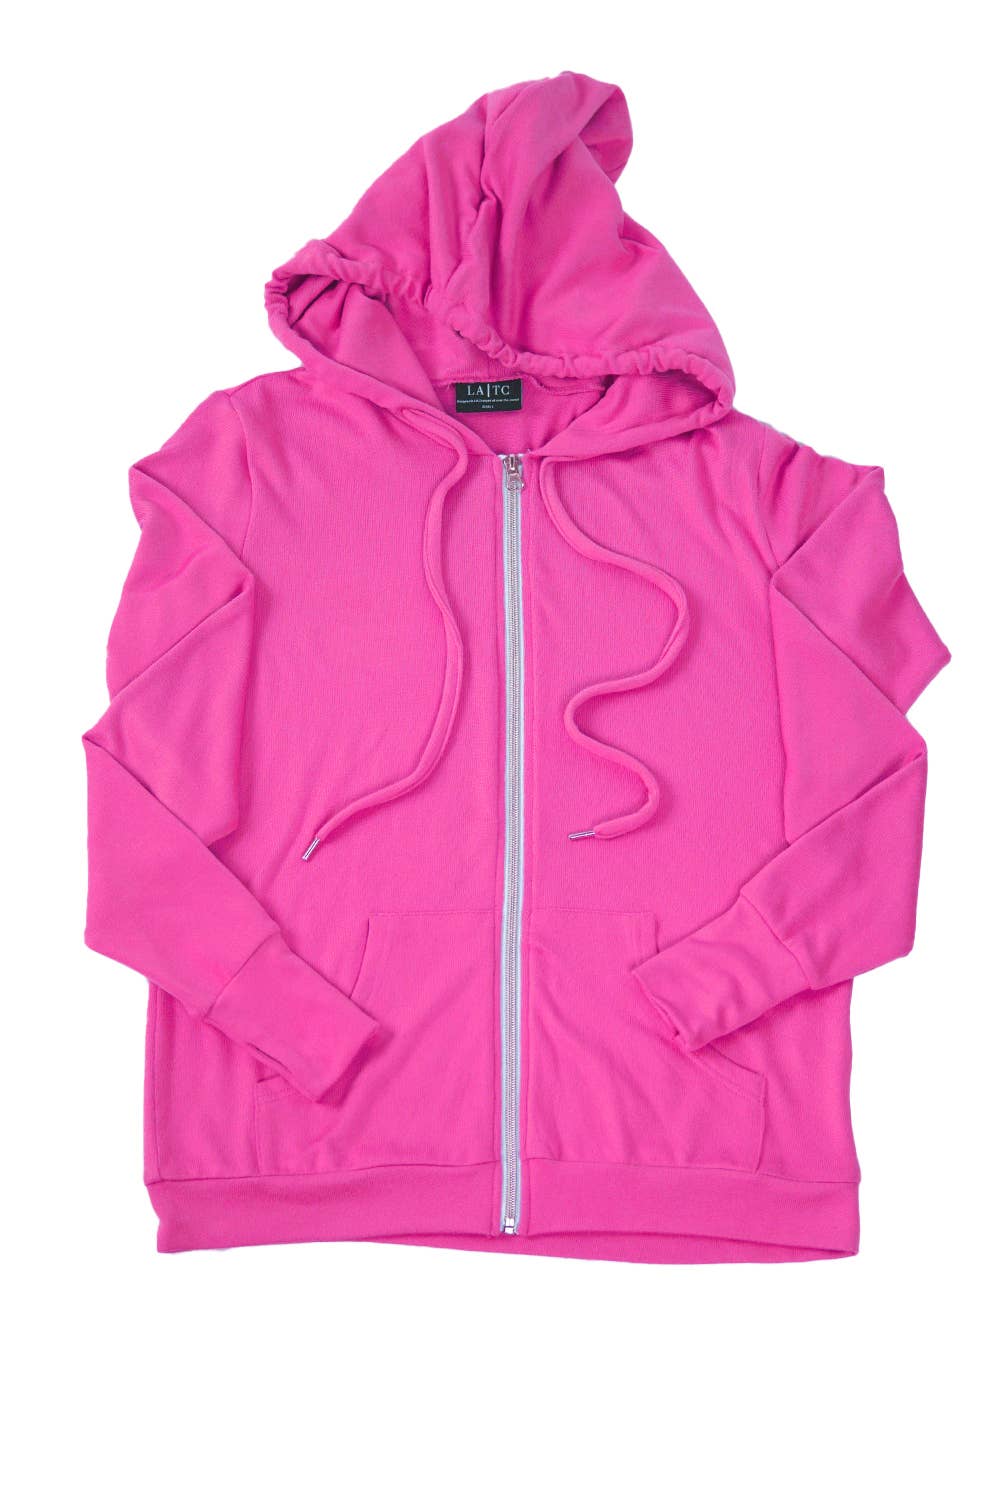 STYLED BY ALX COUTURE MIAMI BOUTIQUE WOMENS TOP PINK Pink Ain't Laurent Zip Up Hoodie